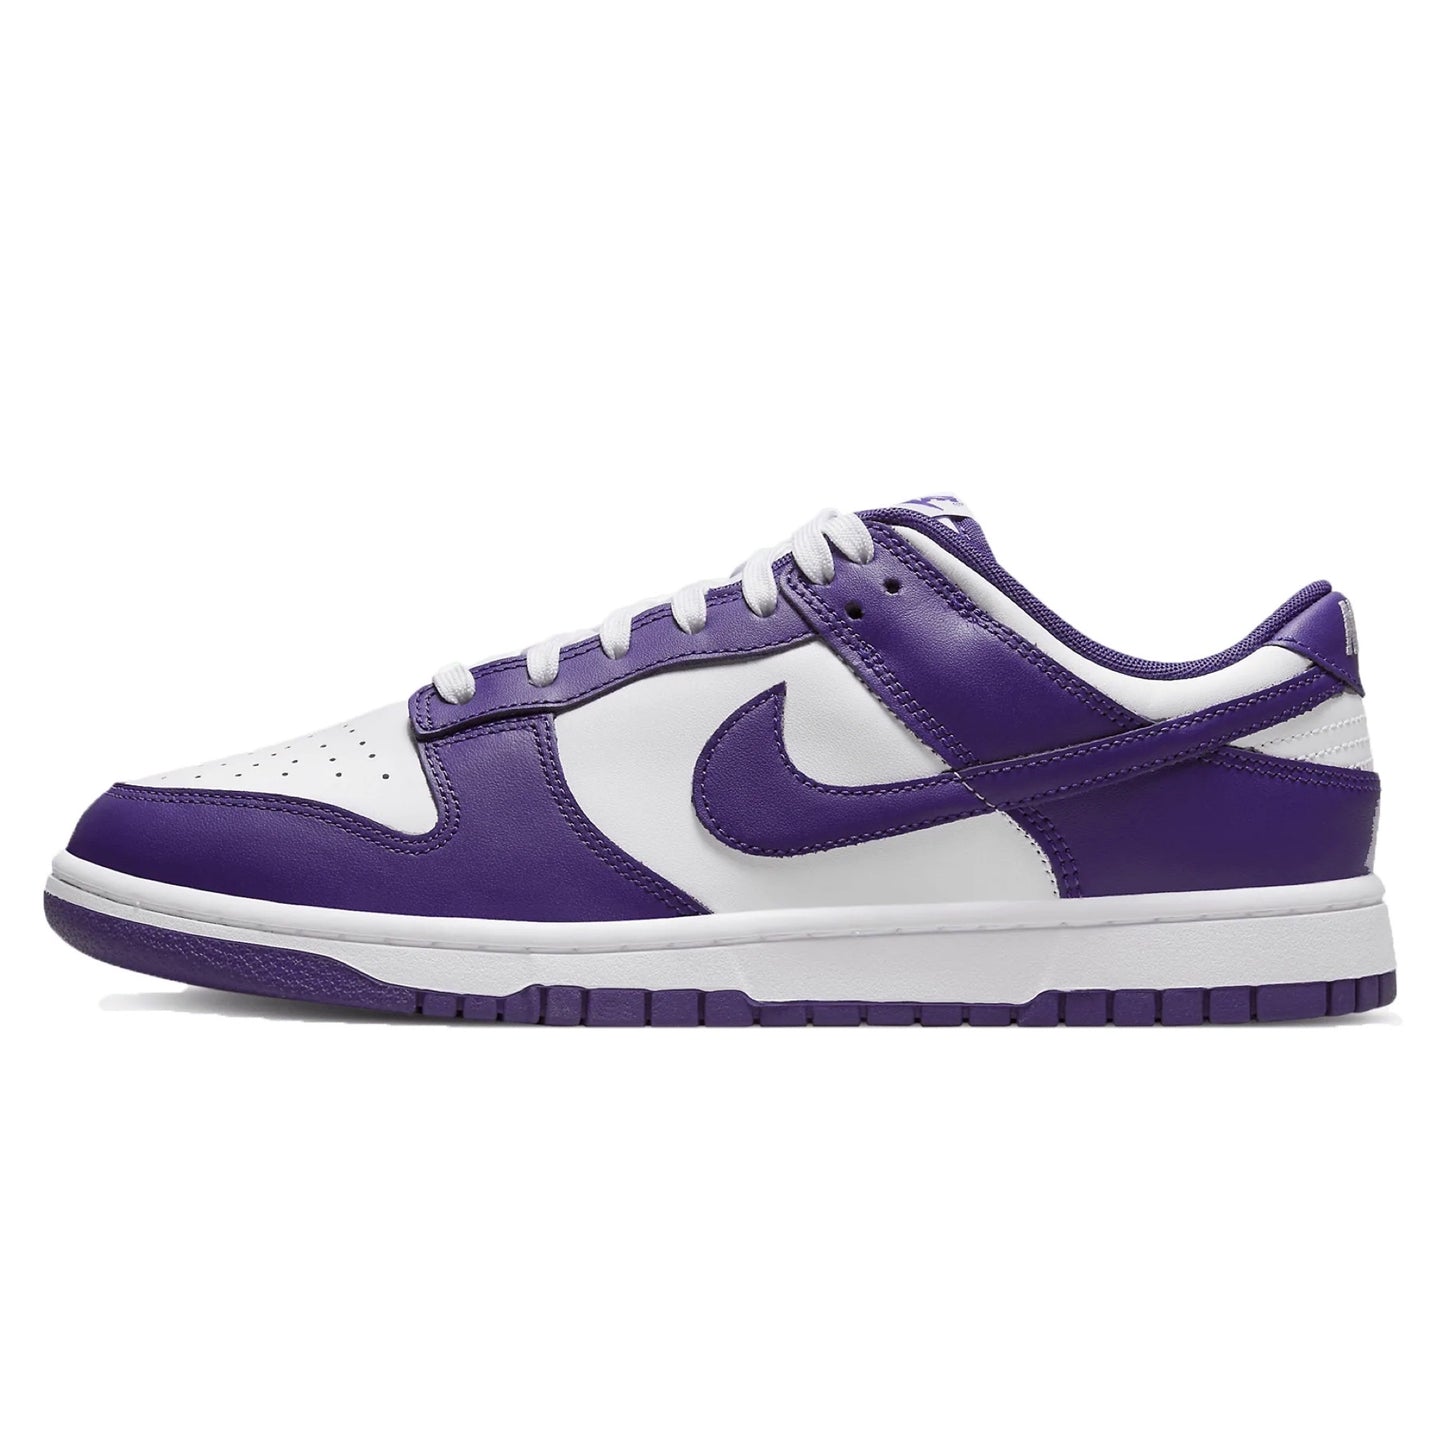 Contrast Clothing Worthing Nike dunk low court purple sneakers